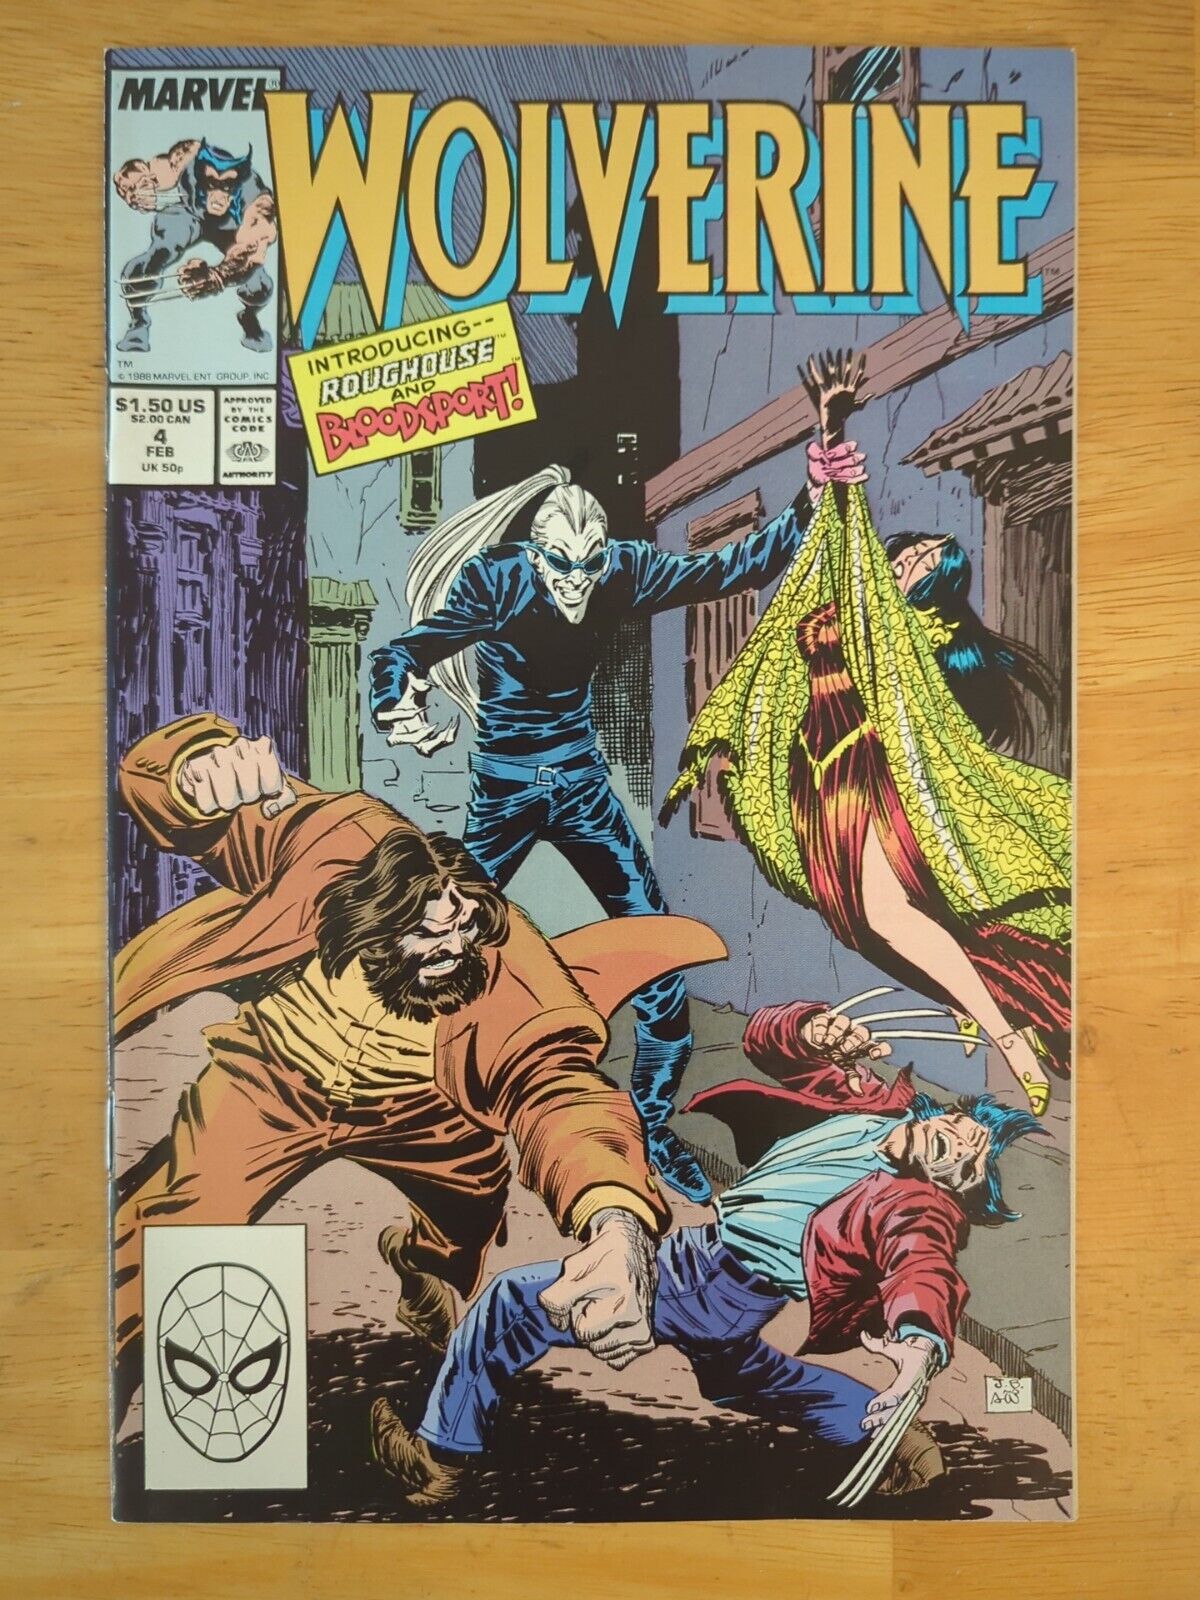 Wolverine #4 - 1st Appearance Bloodsport And Roughouse - 1989 Marvel - VF+